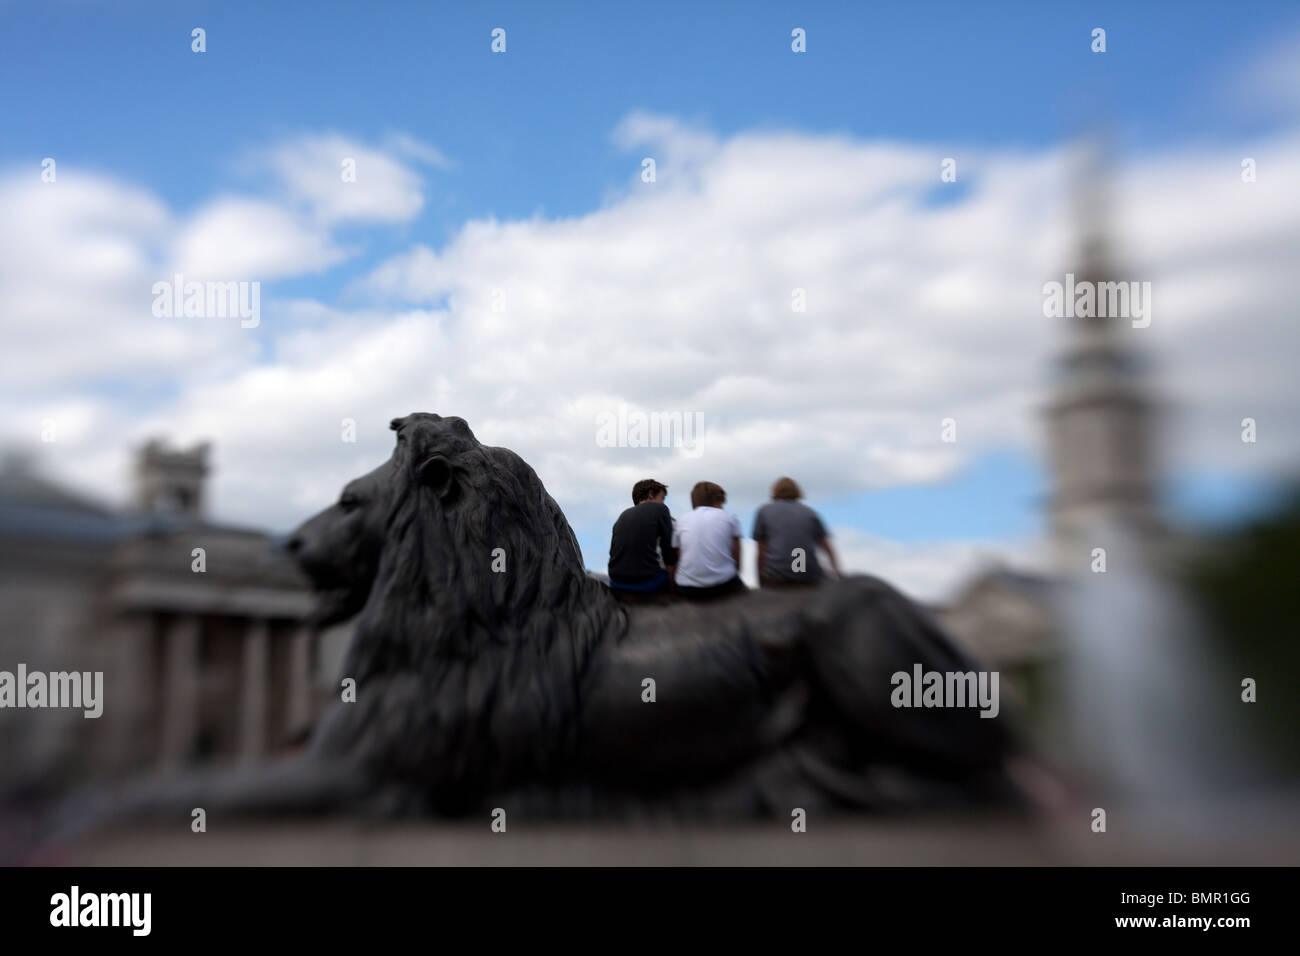 Three young men sitting on top of one of the lion statues in Trafalgar Square in London, England. Stock Photo